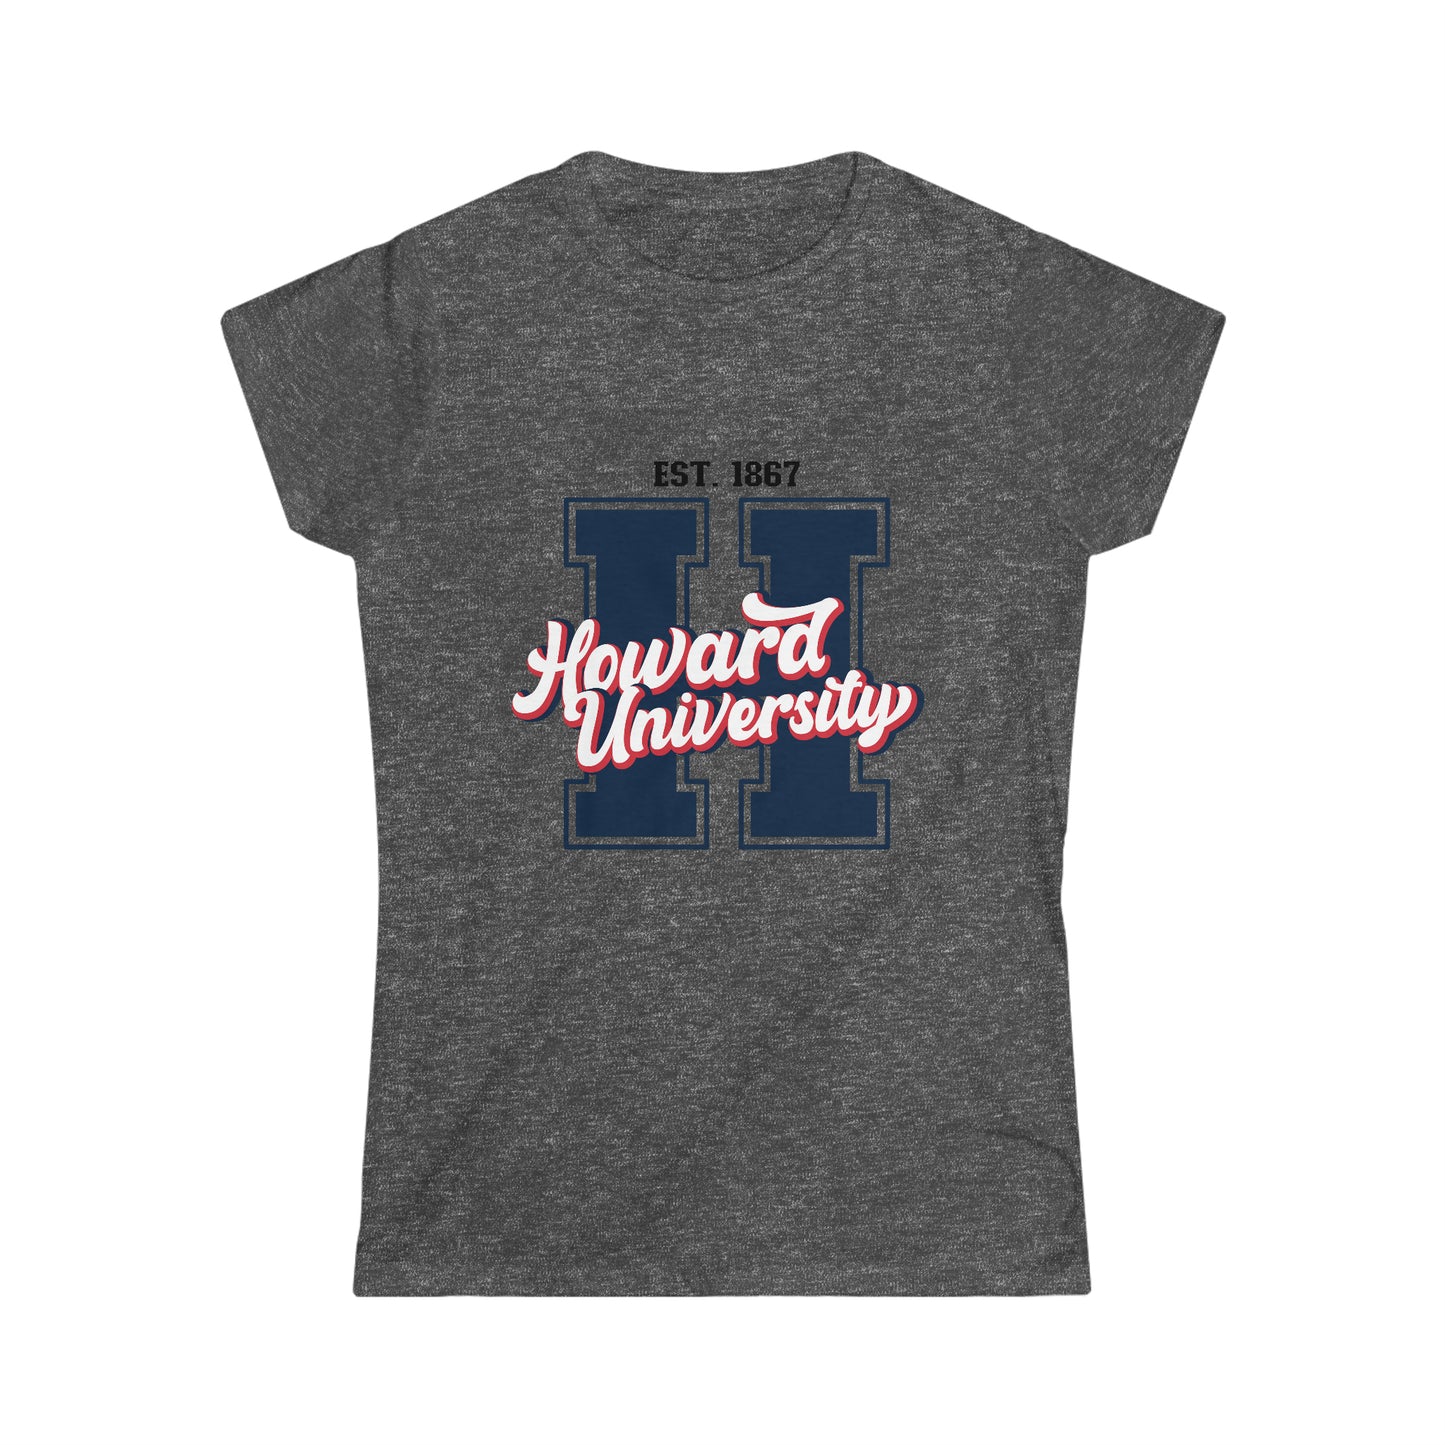 HBCU Love/ Howard University/ "H" is for Howard/ Women's Softstyle Tee)